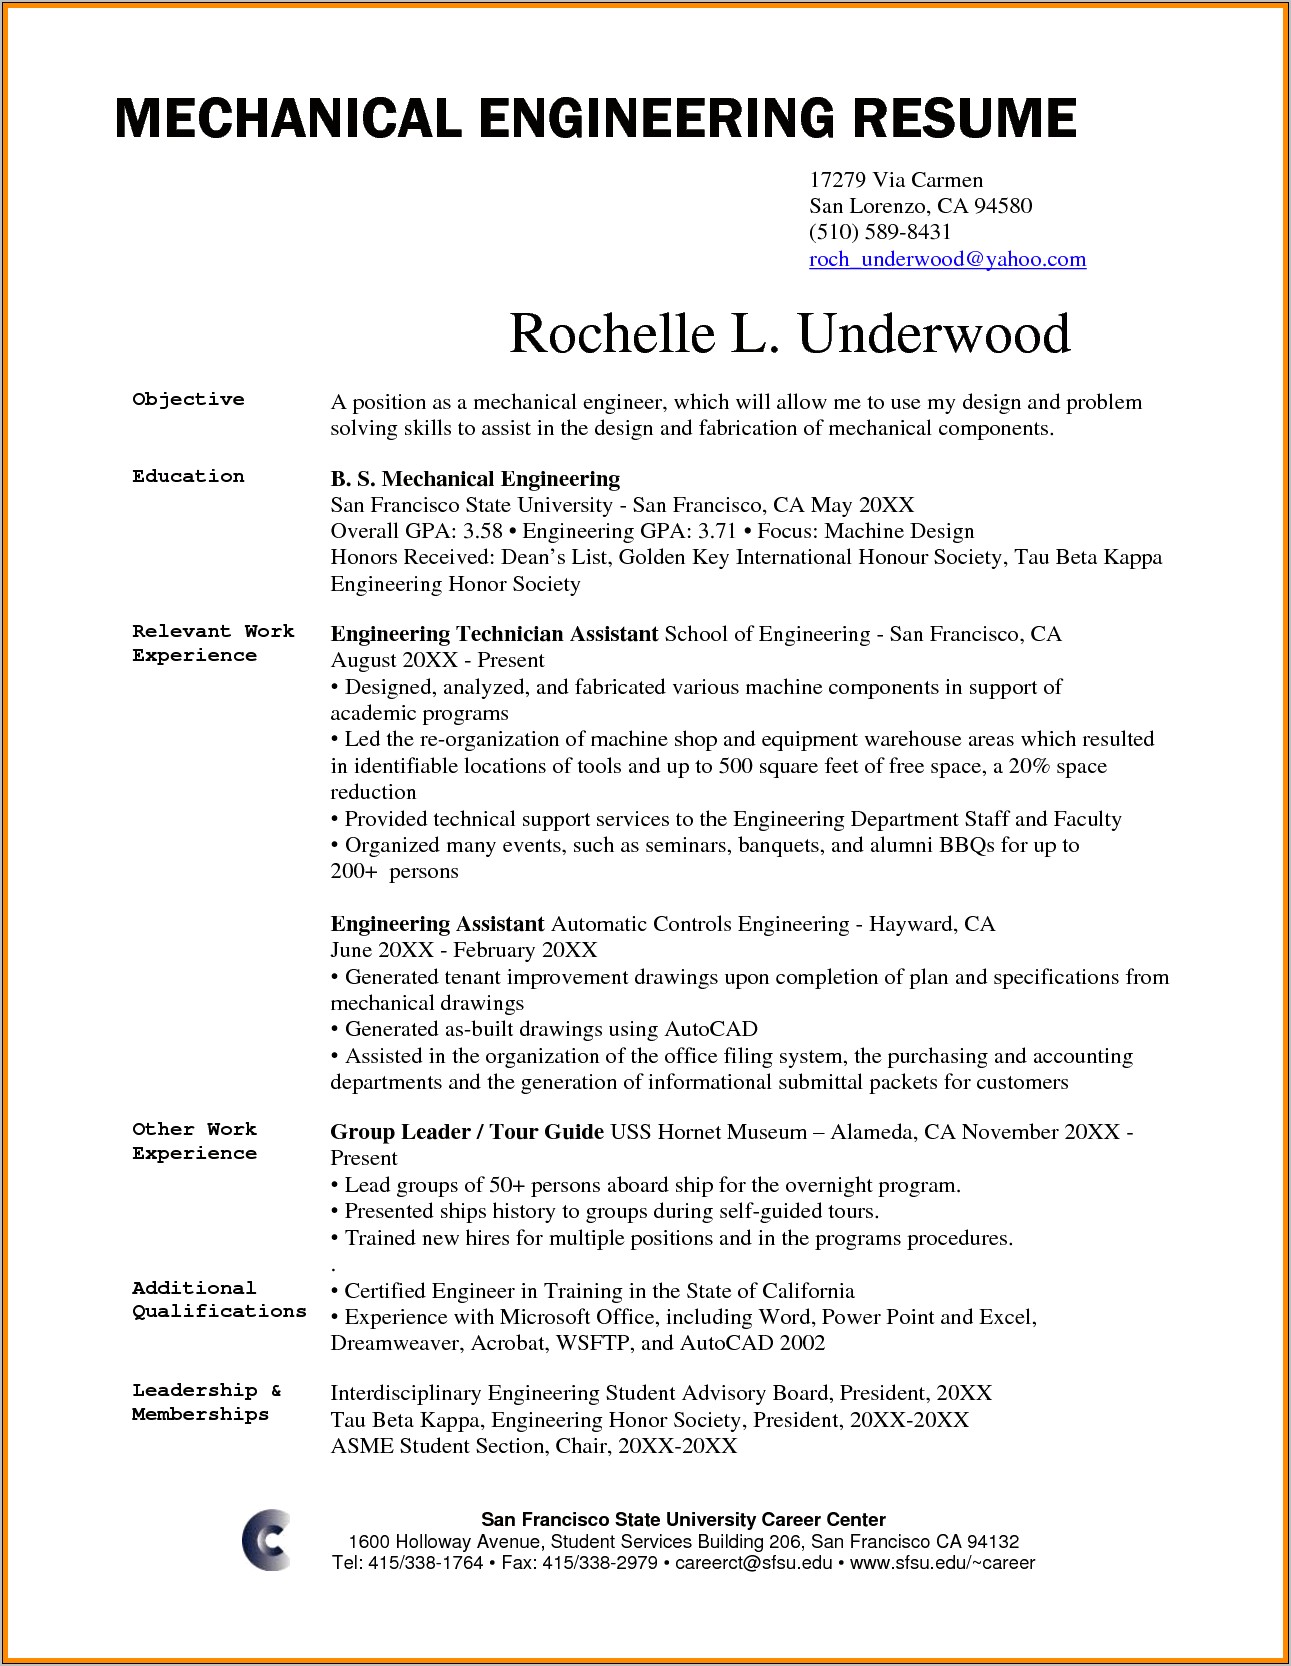 Resume Objective Examples Mechanical Engineering